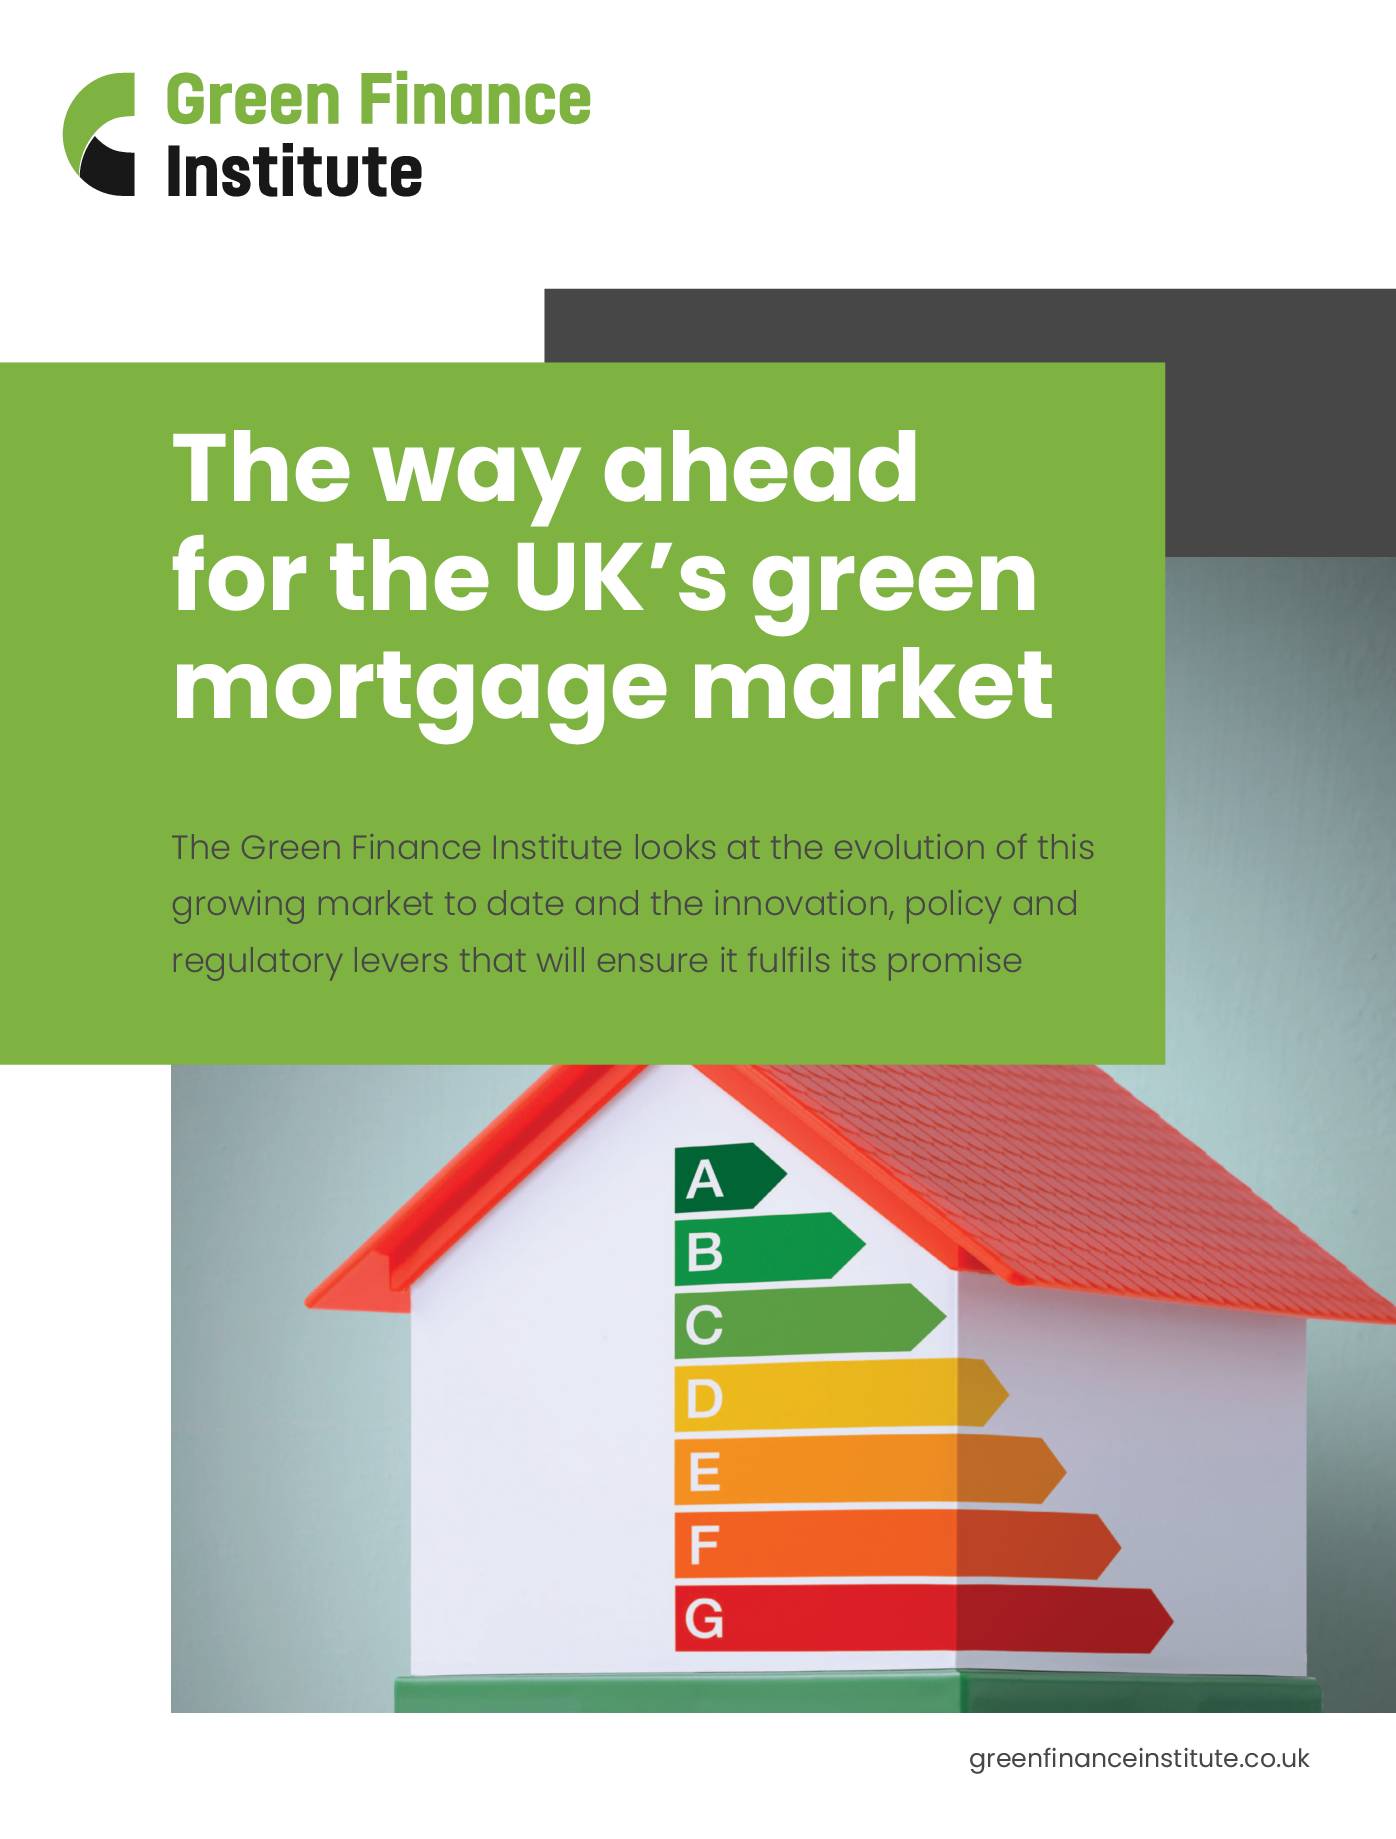 The Way Ahead for the UK’s Green Mortgage Market